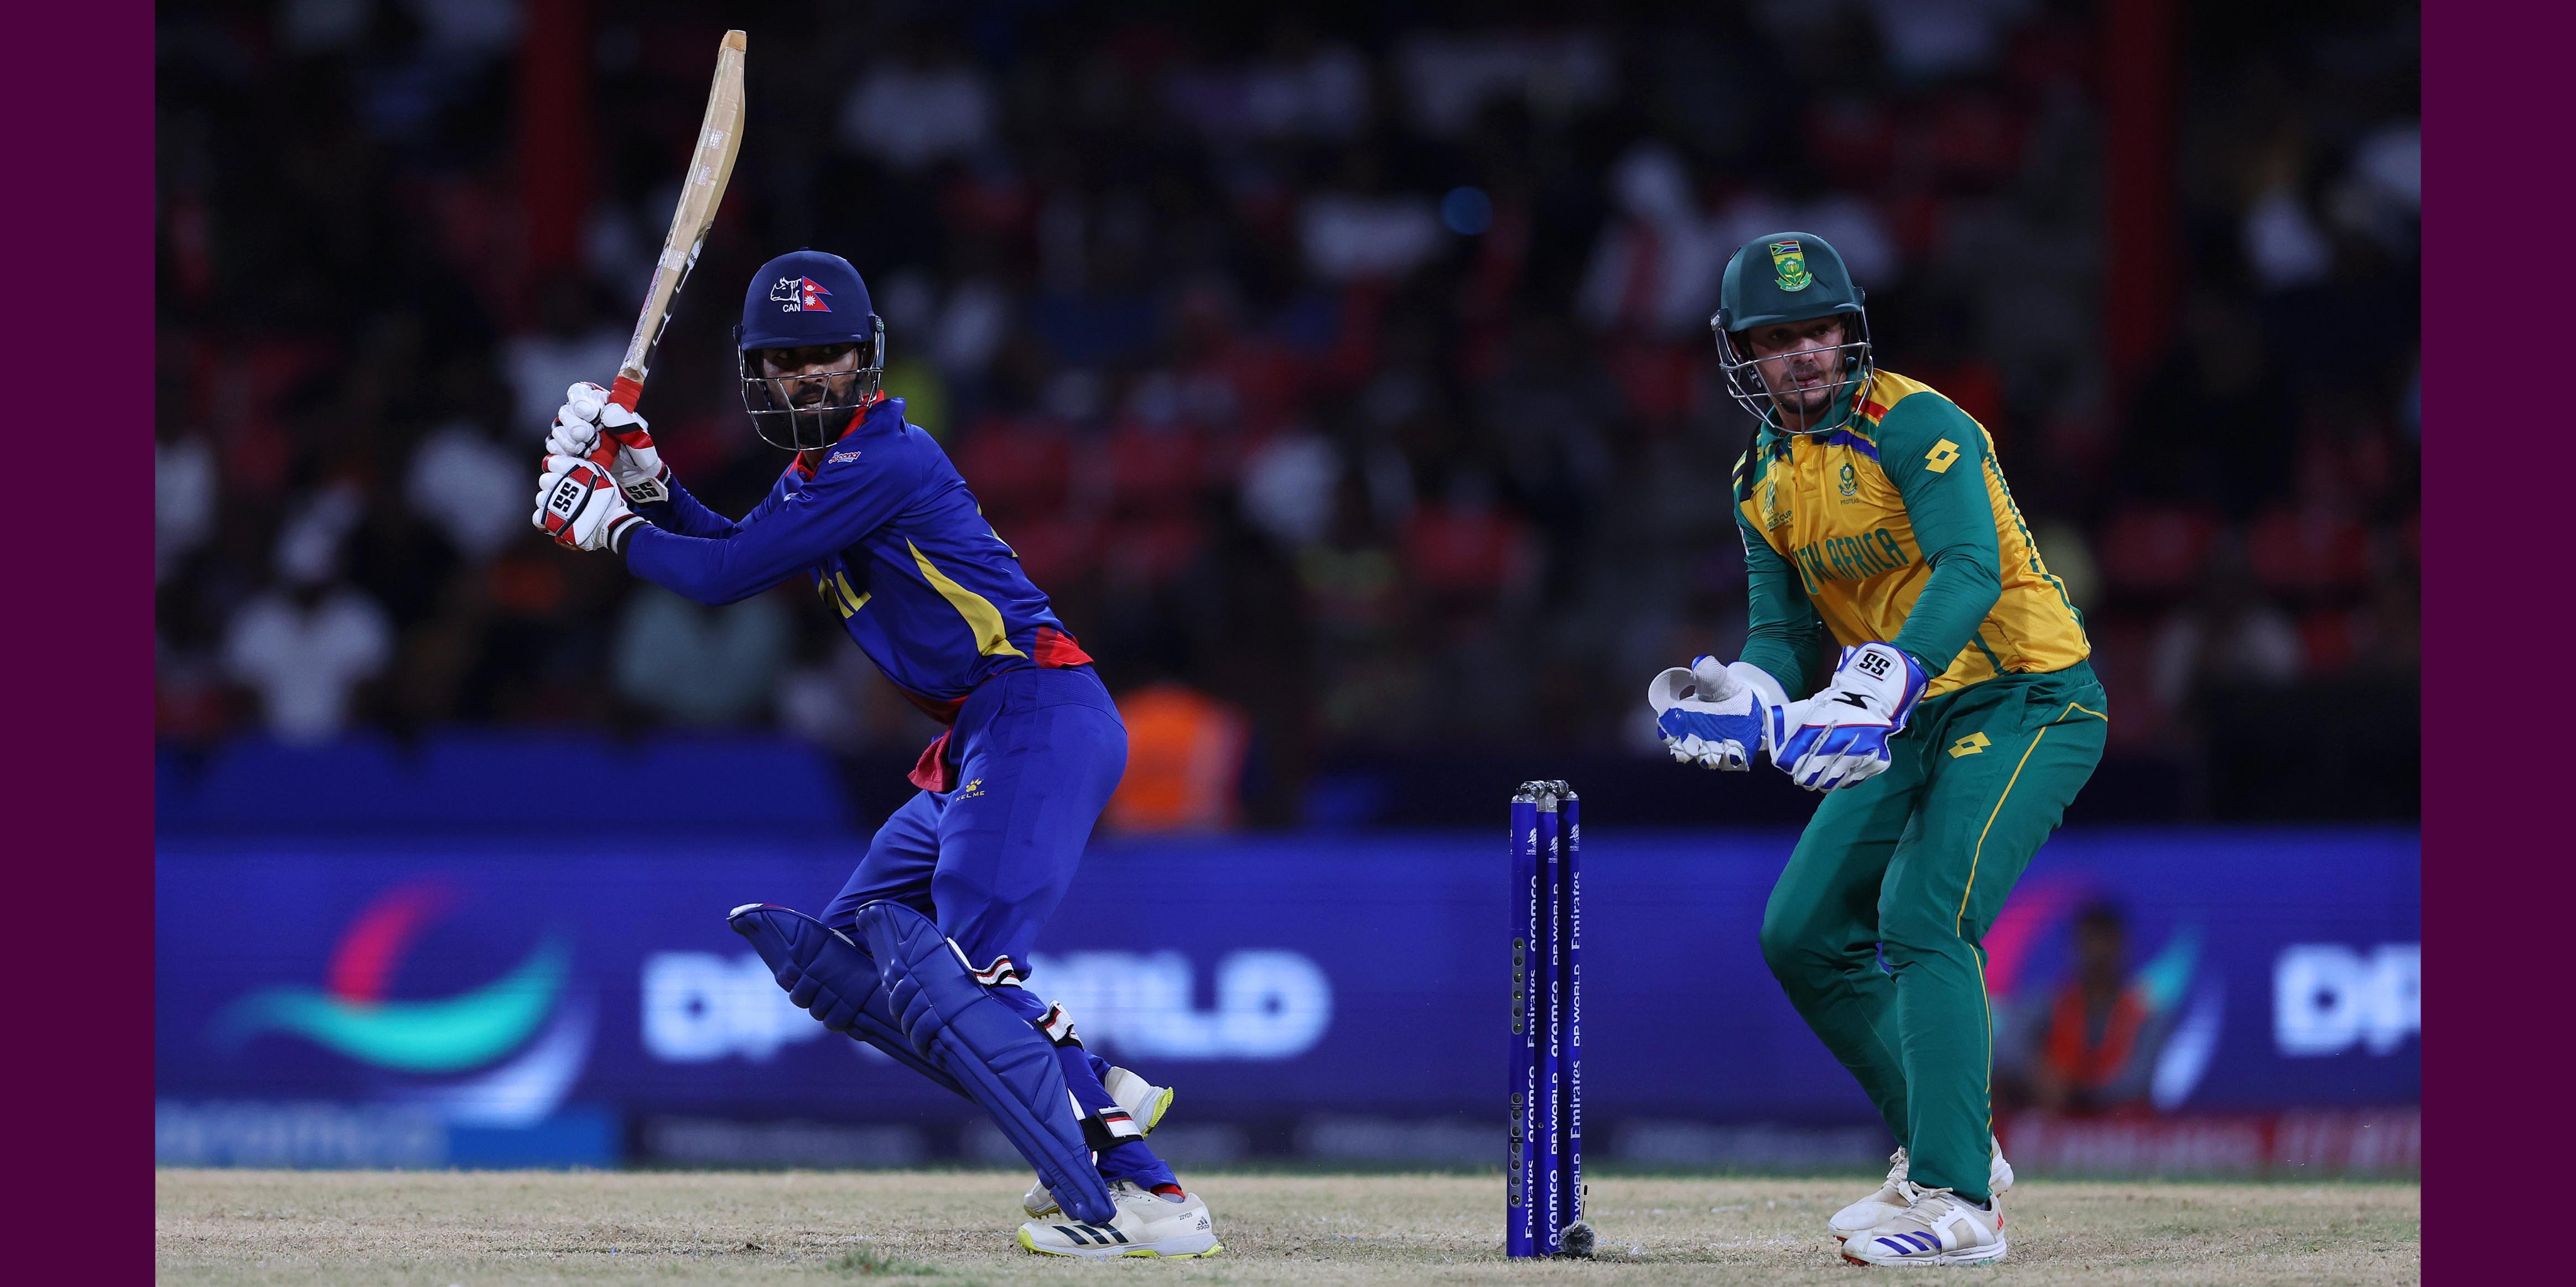 Nepal concedes one-run defeat against South Africa